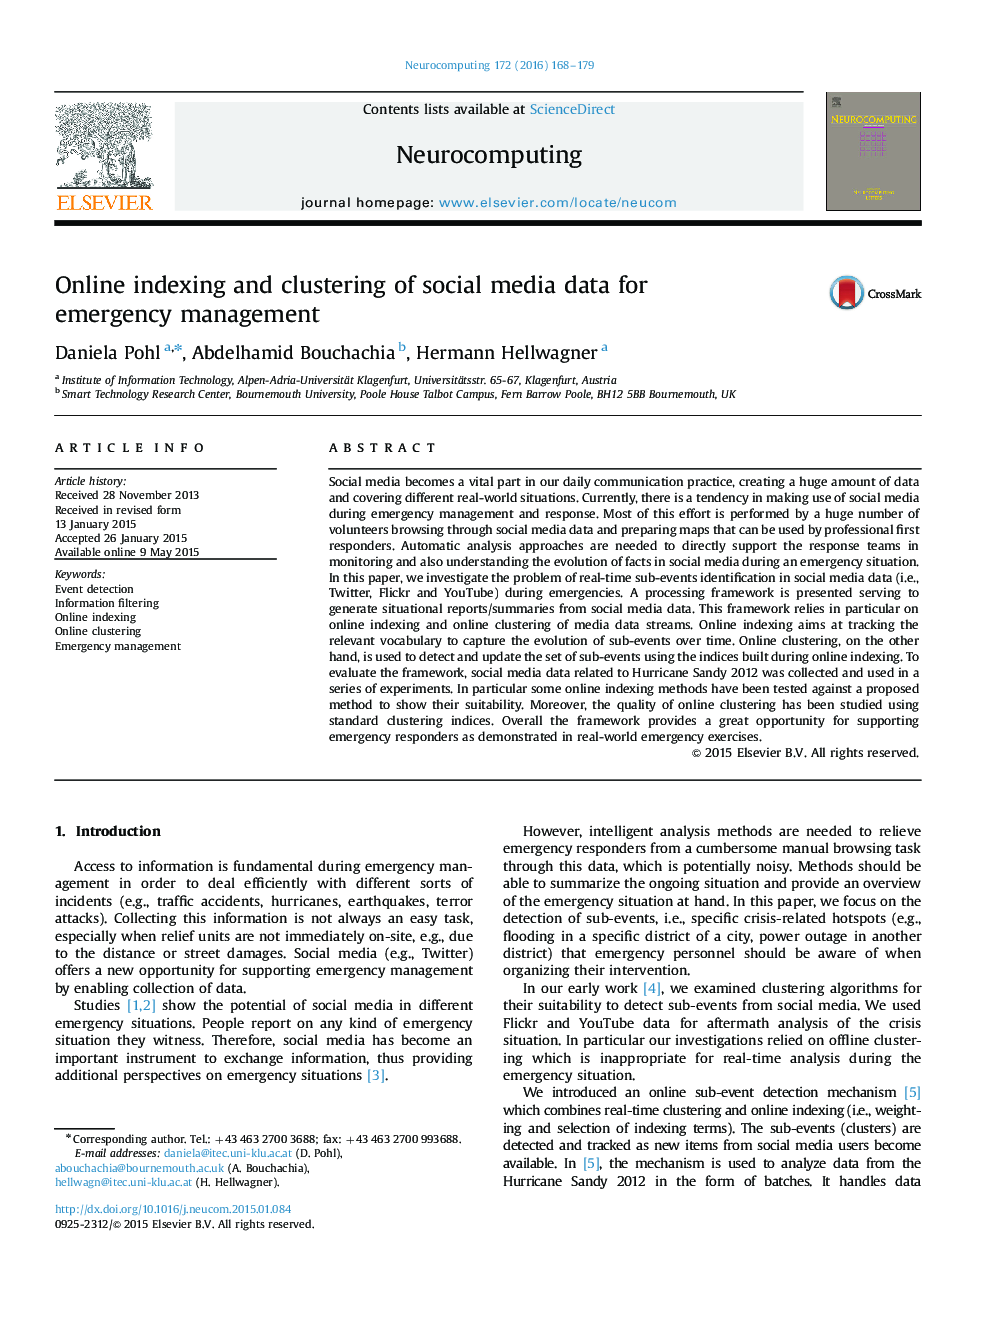 Online indexing and clustering of social media data for emergency management